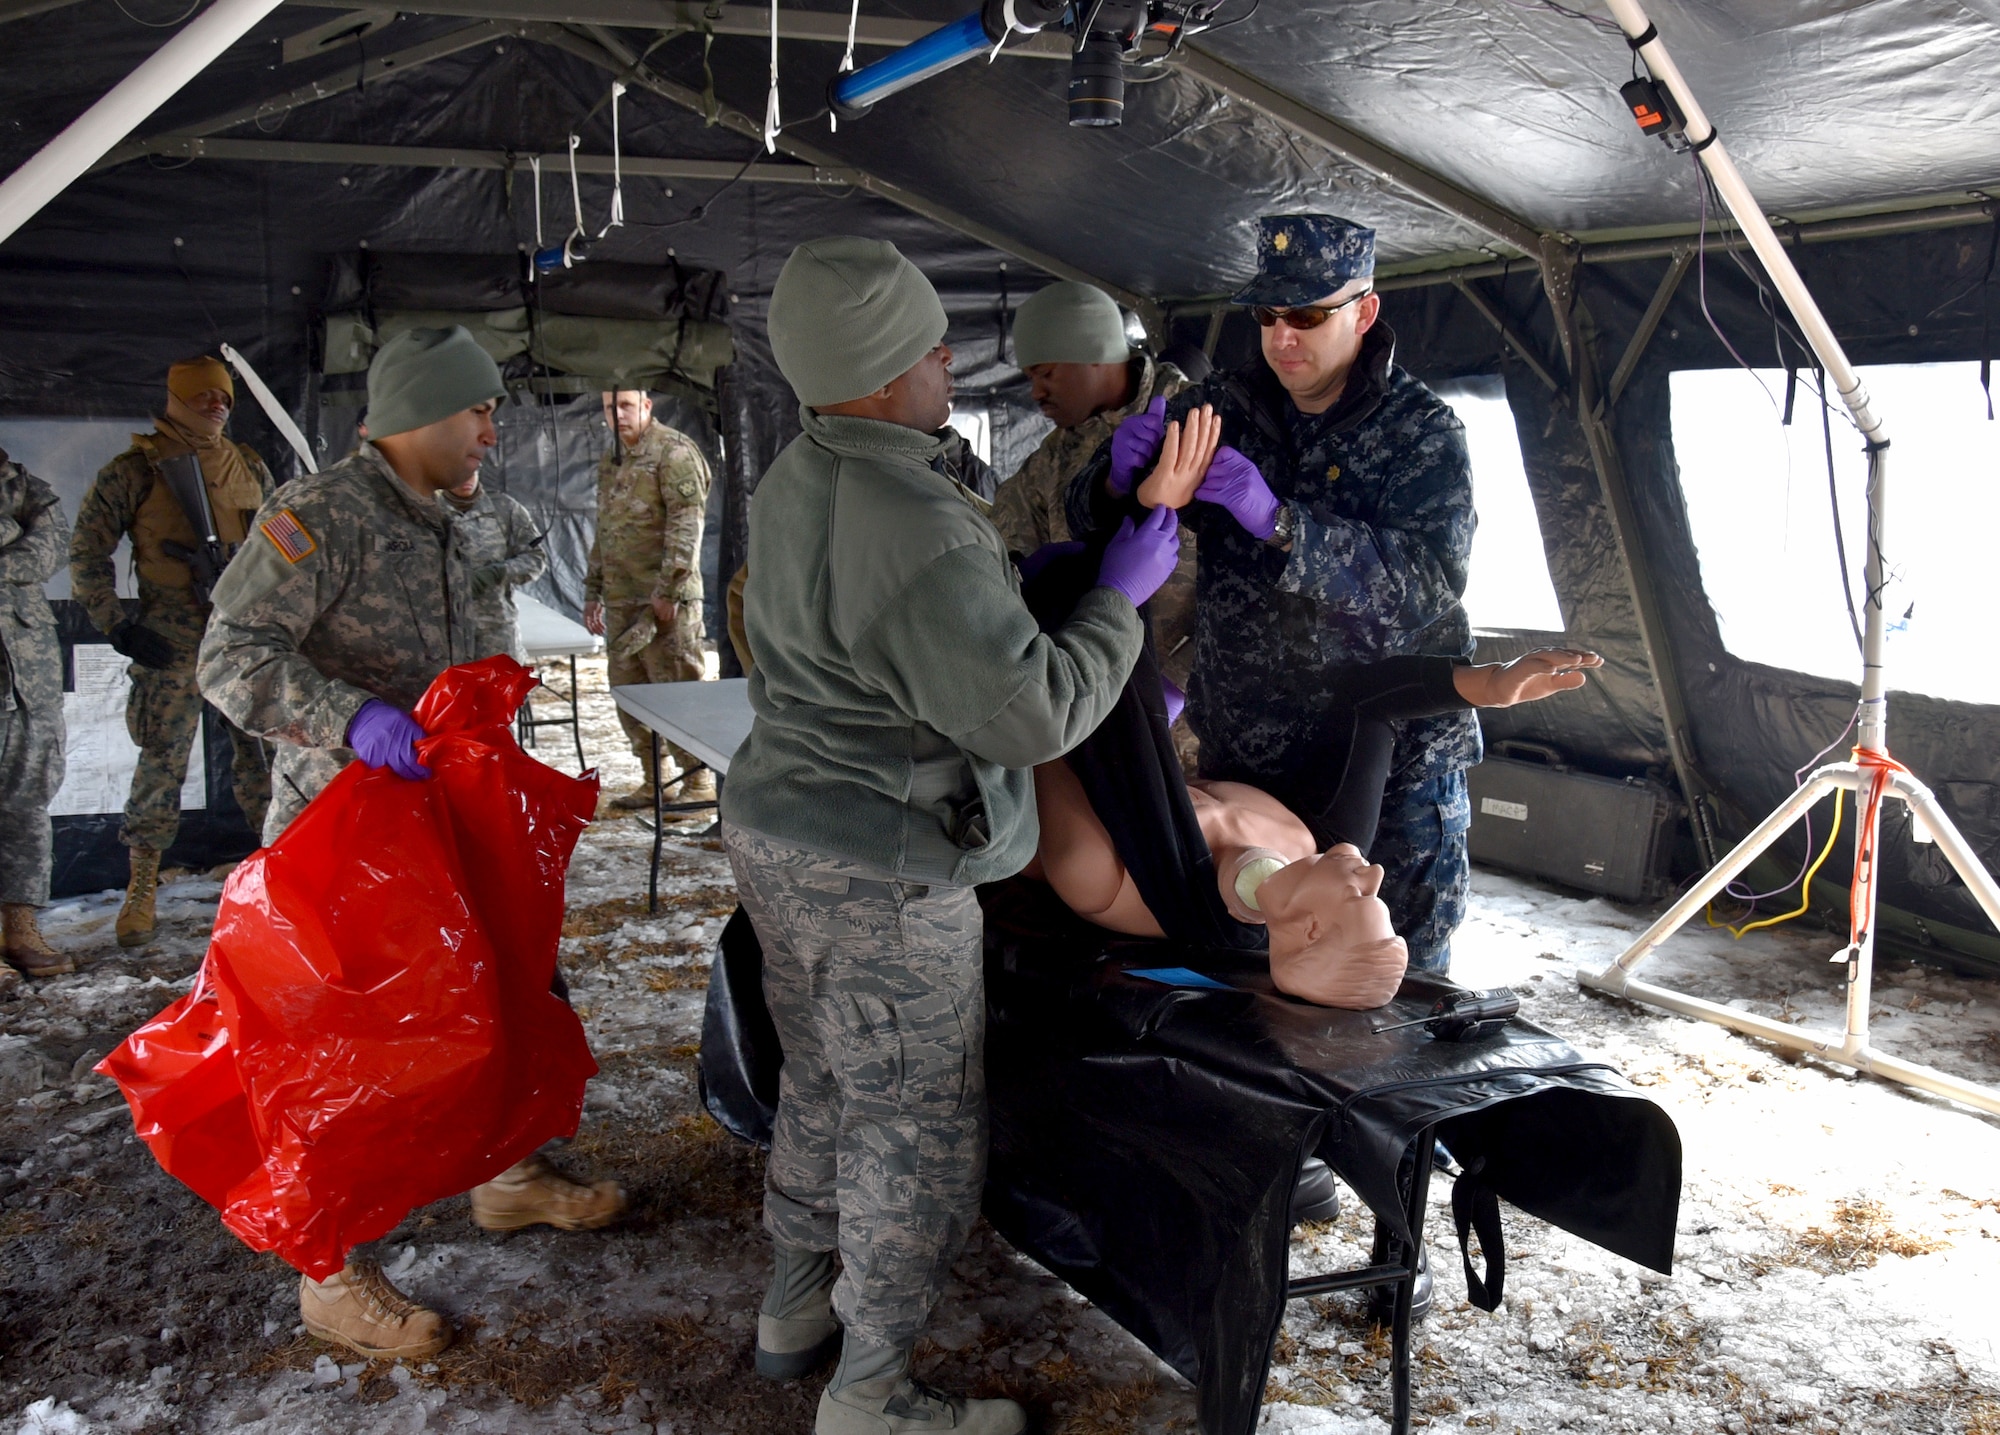 U.S. Navy Lt. Cmdr. Bryan Platt (right), Armed Forces Medical Examiner System forensic pathologist, demonstrates an examination at a simulated Mortuary Affairs Contaminated Remains Mitigation Site during Operation Joint Recovery exercise at Joint Base McGuire-Dix-Lakehurst, N.J., Mar. 10, 2018. Platt familiarized participants in contaminated remains recovery, processing and procedural guidance and provide an operational assessment. (U.S. Air Force photo by Tech. Sgt. Robert M. Trujillo)